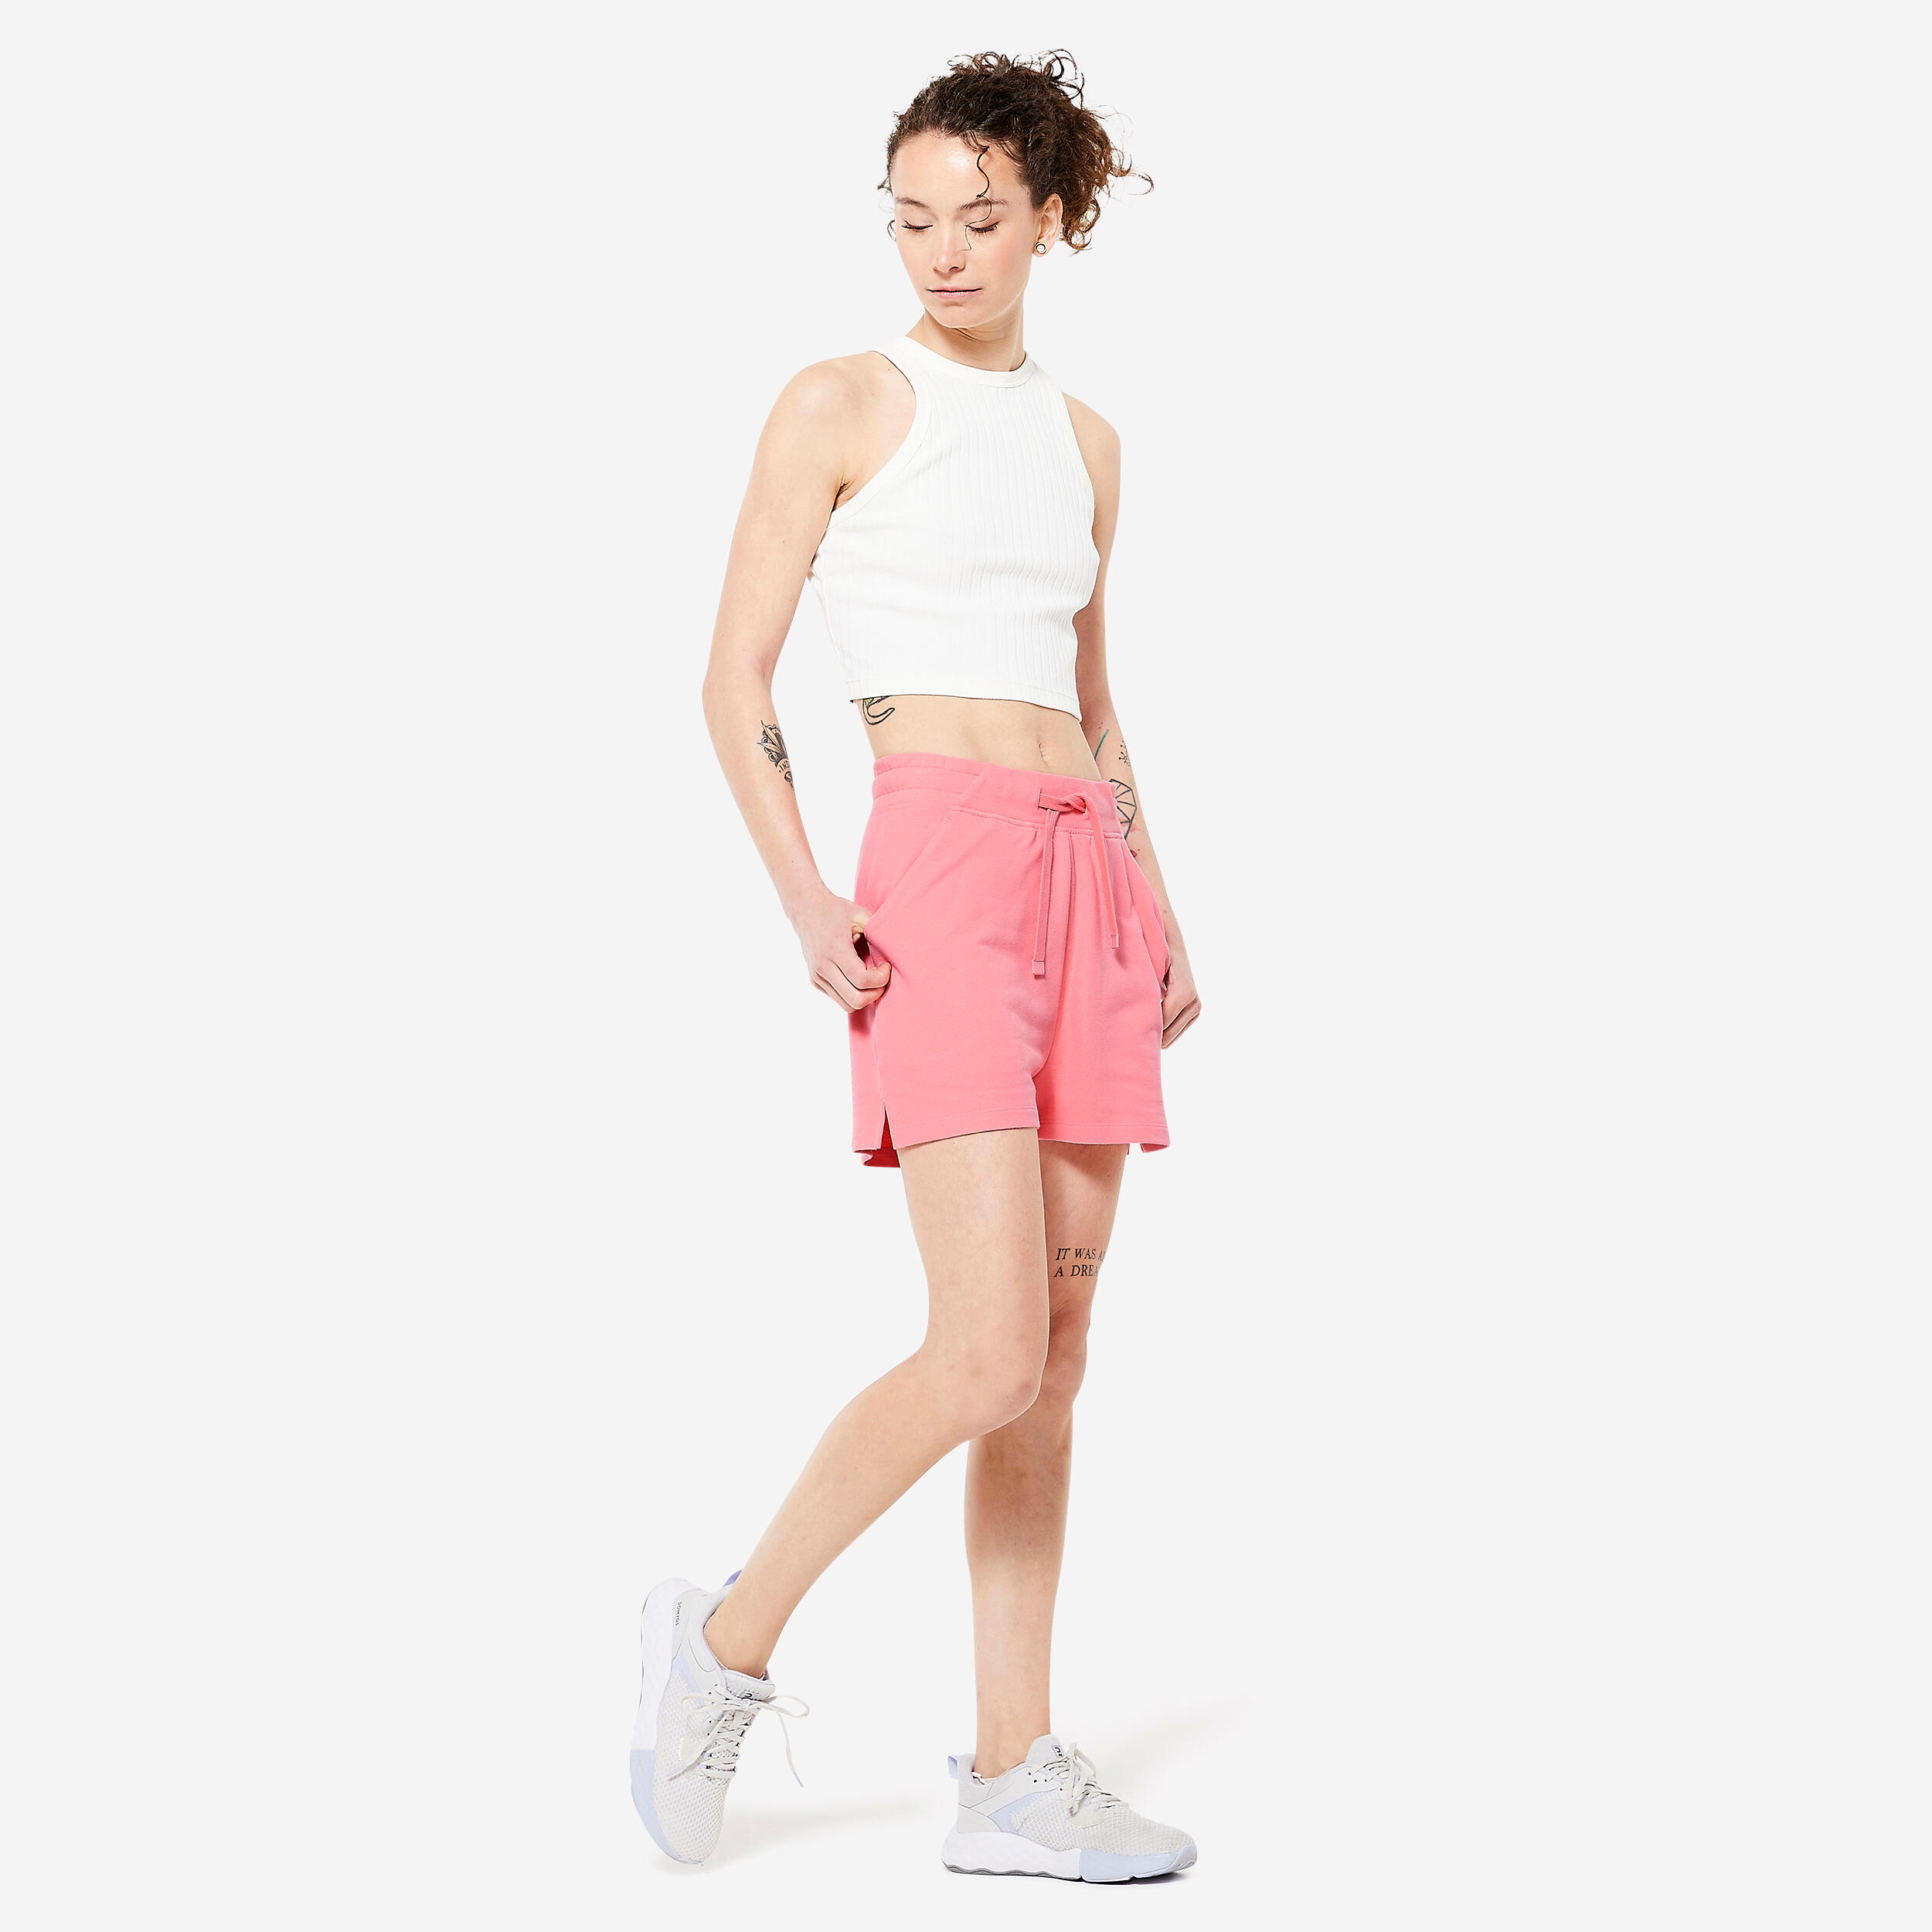 Women's Cotton Fitness Shorts with Pocket 520 - Pink Lychee 2/6